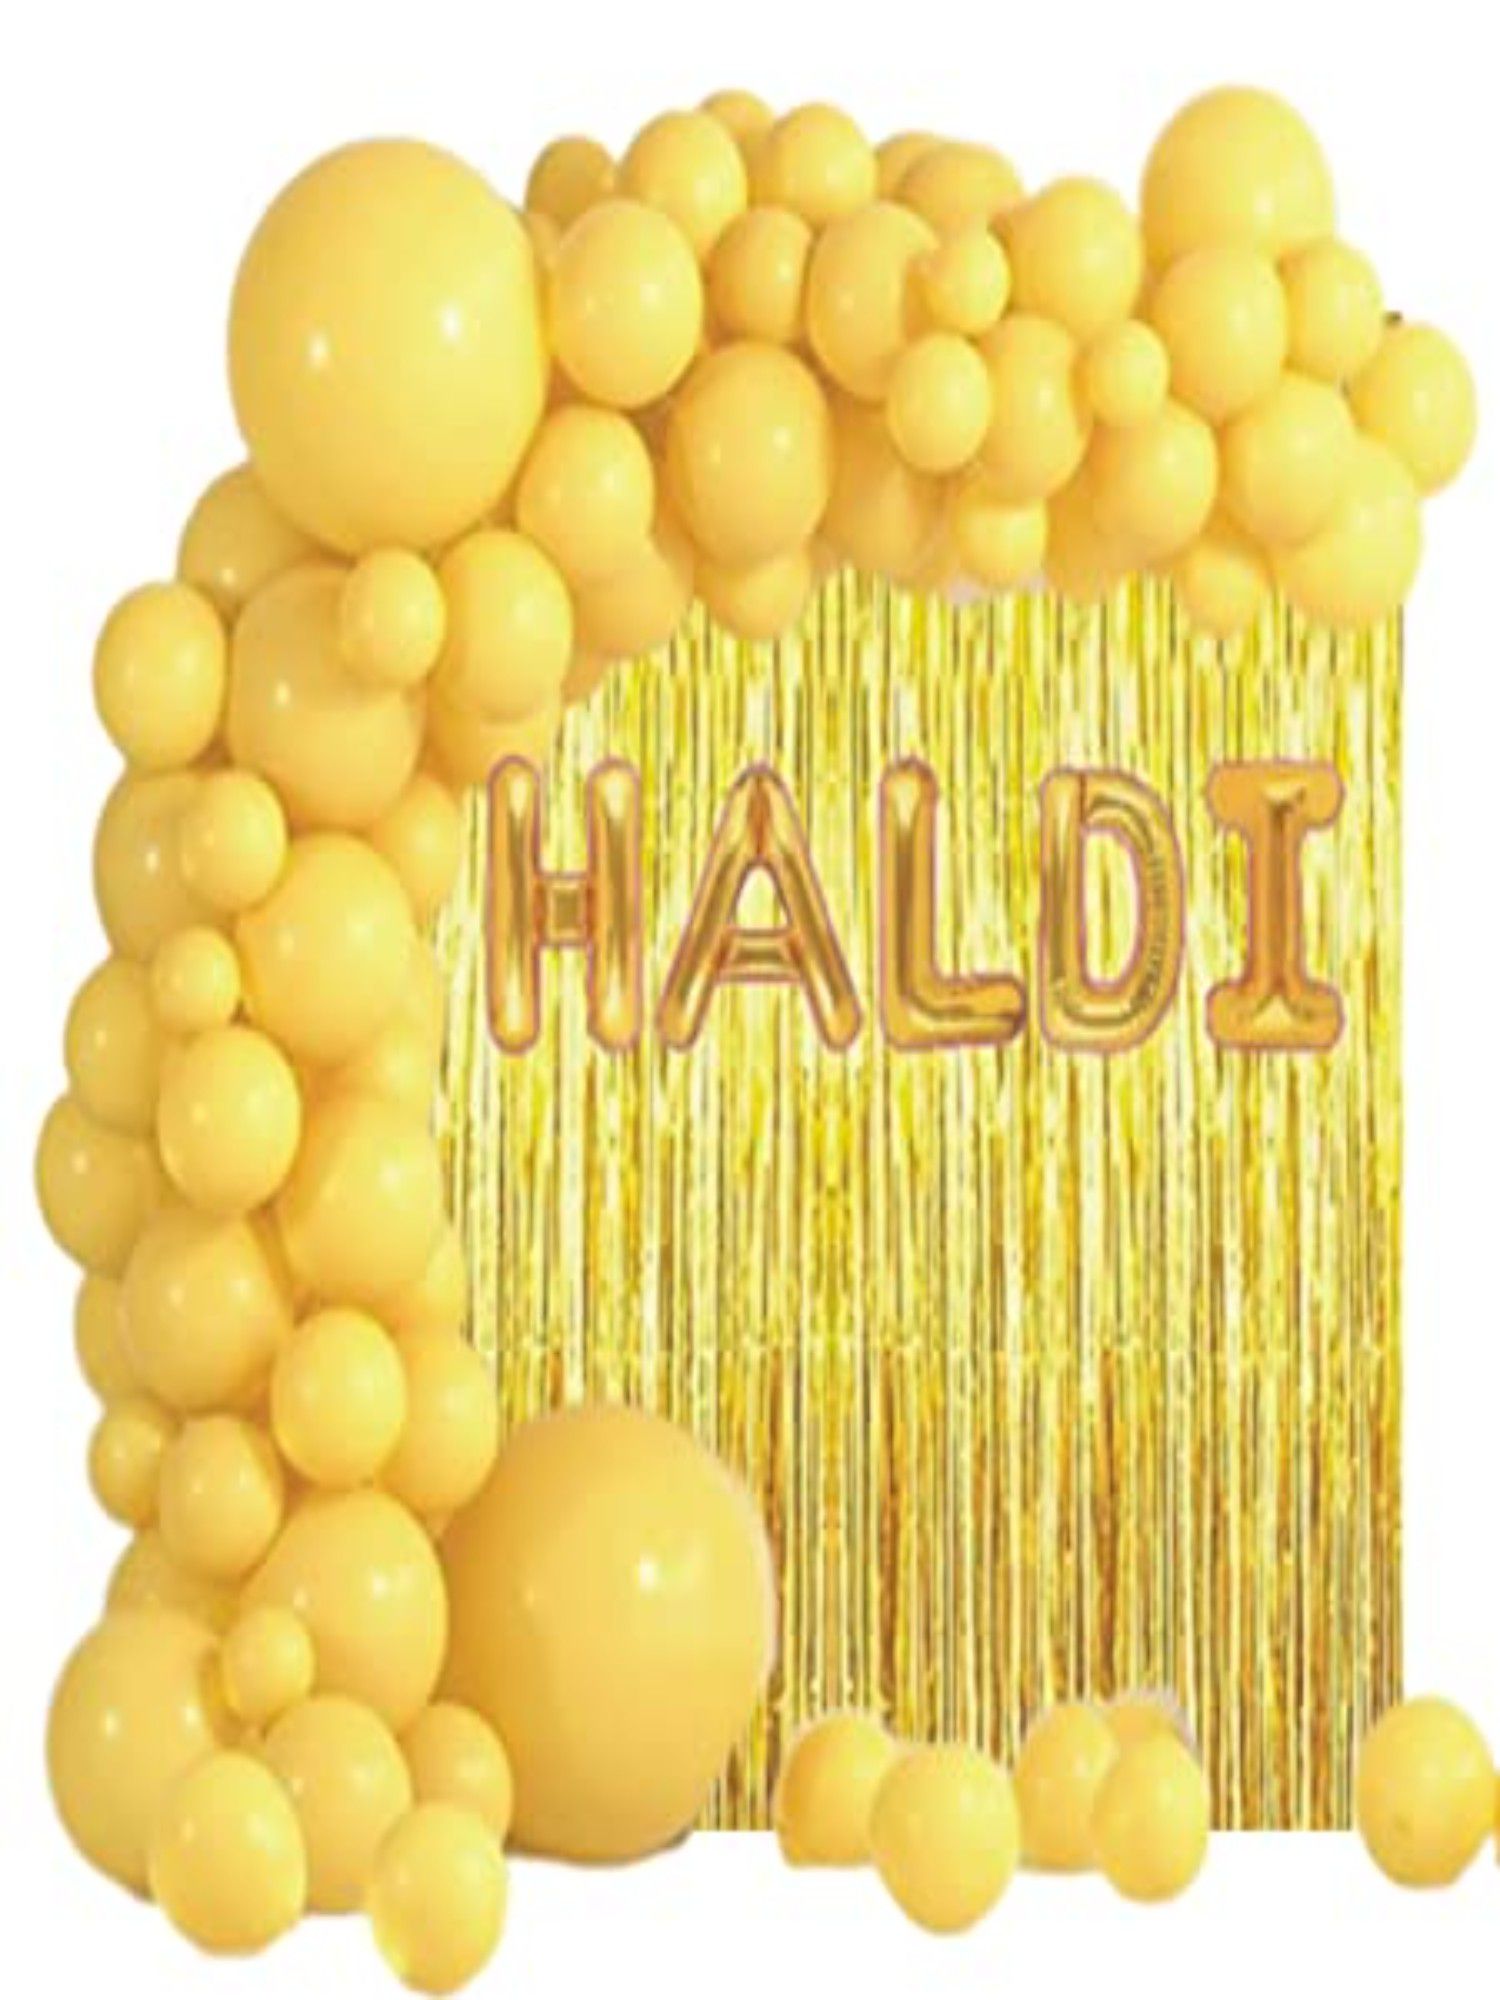     			Devdrishti Products Haldi Ceremony Decoration Pack of 43 pcs Kit comes with 40 yellow balloons 1 haldi foil balloon and 2 pcs golden curtains for Haldi Function Decoration at Home or Hall